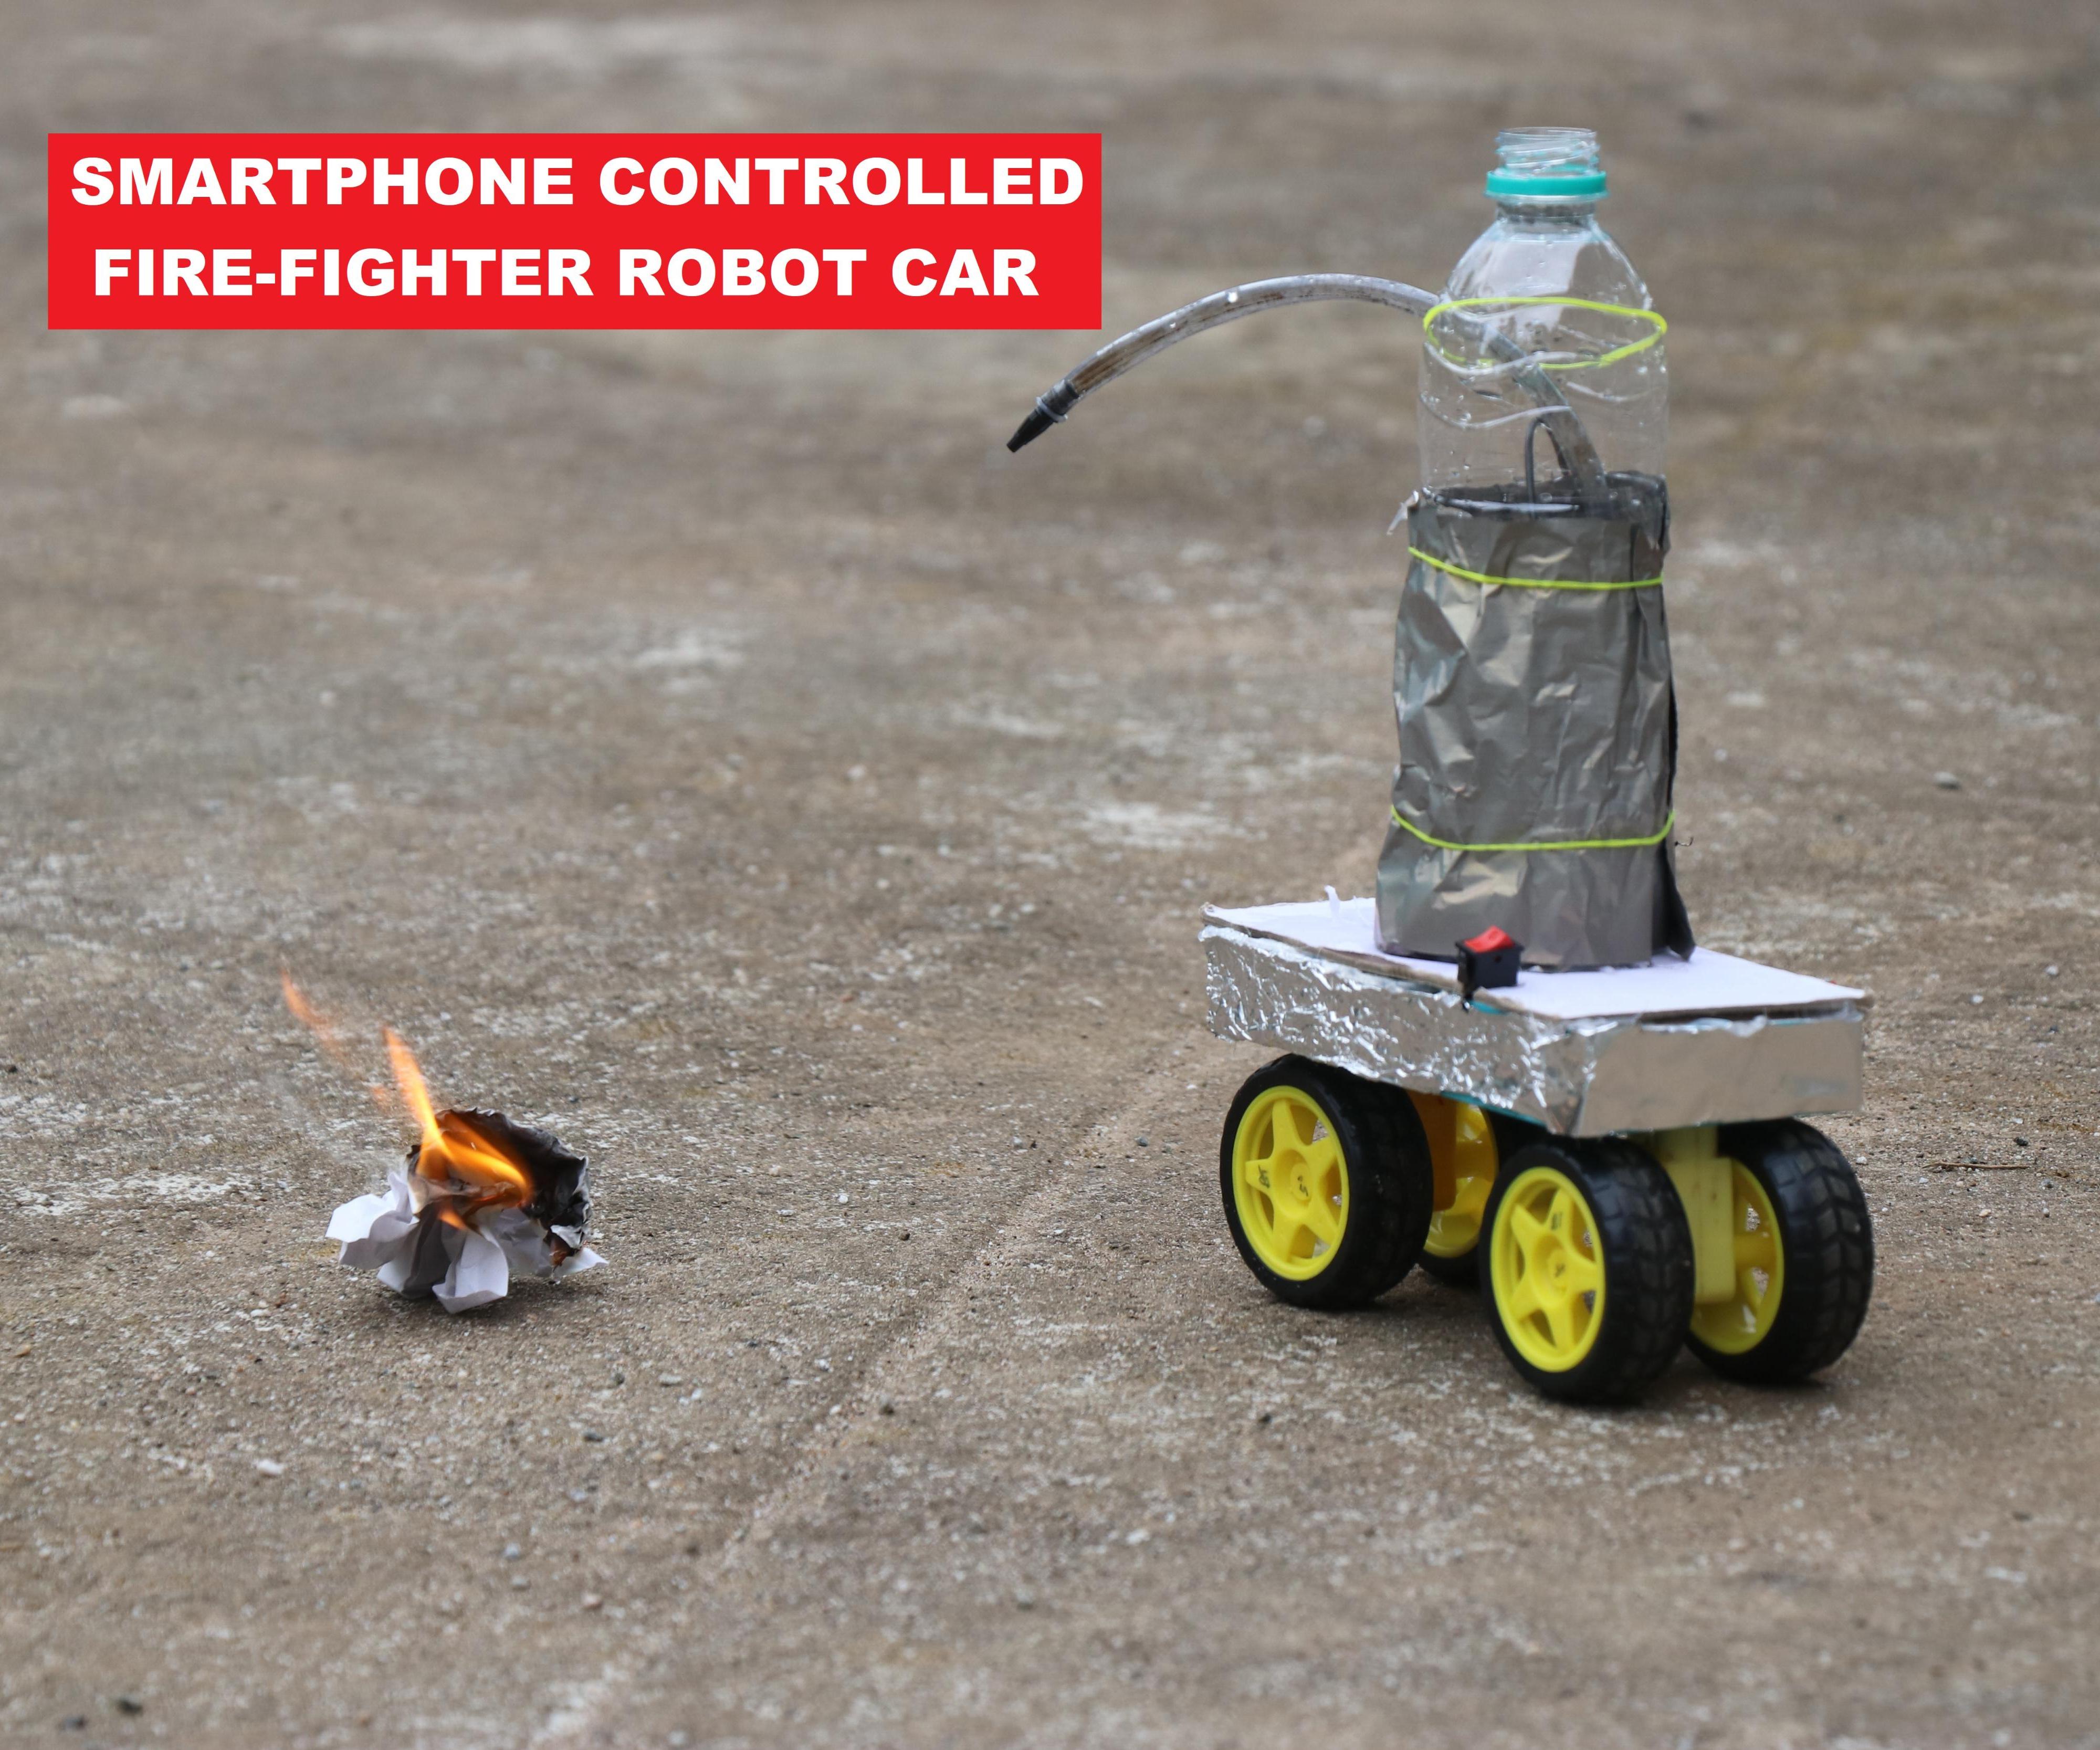 How to Make Smartphone Controlled Fire Fighting Robot Car